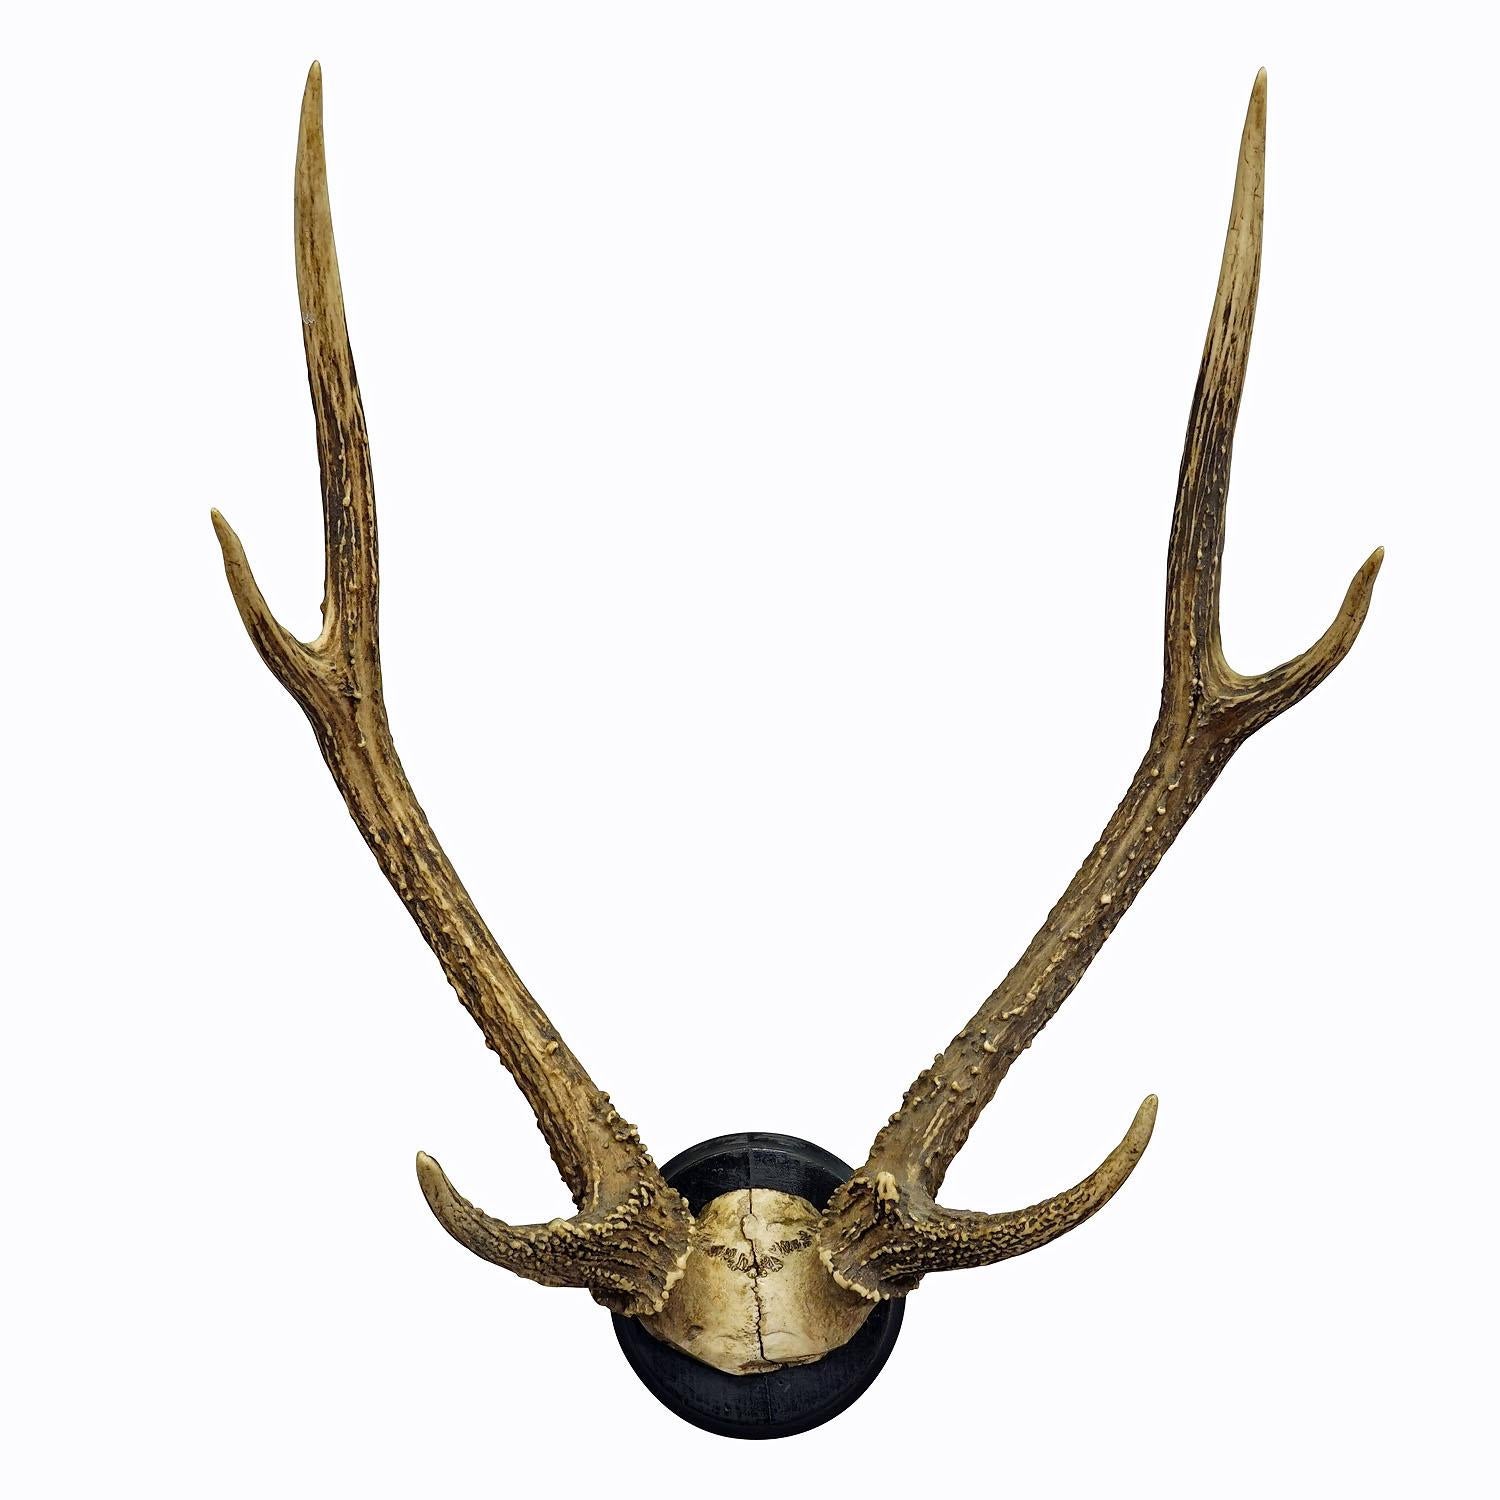 Black Forest 8 Pointer Deer Trophy on Wooden Plaque ca. 1900s

A great antique 8 pointer deer (Cervus elaphus) trophy from the Black Forest shot in Germany around 1900. The large antlers are mounted on a turned wall plaque with black